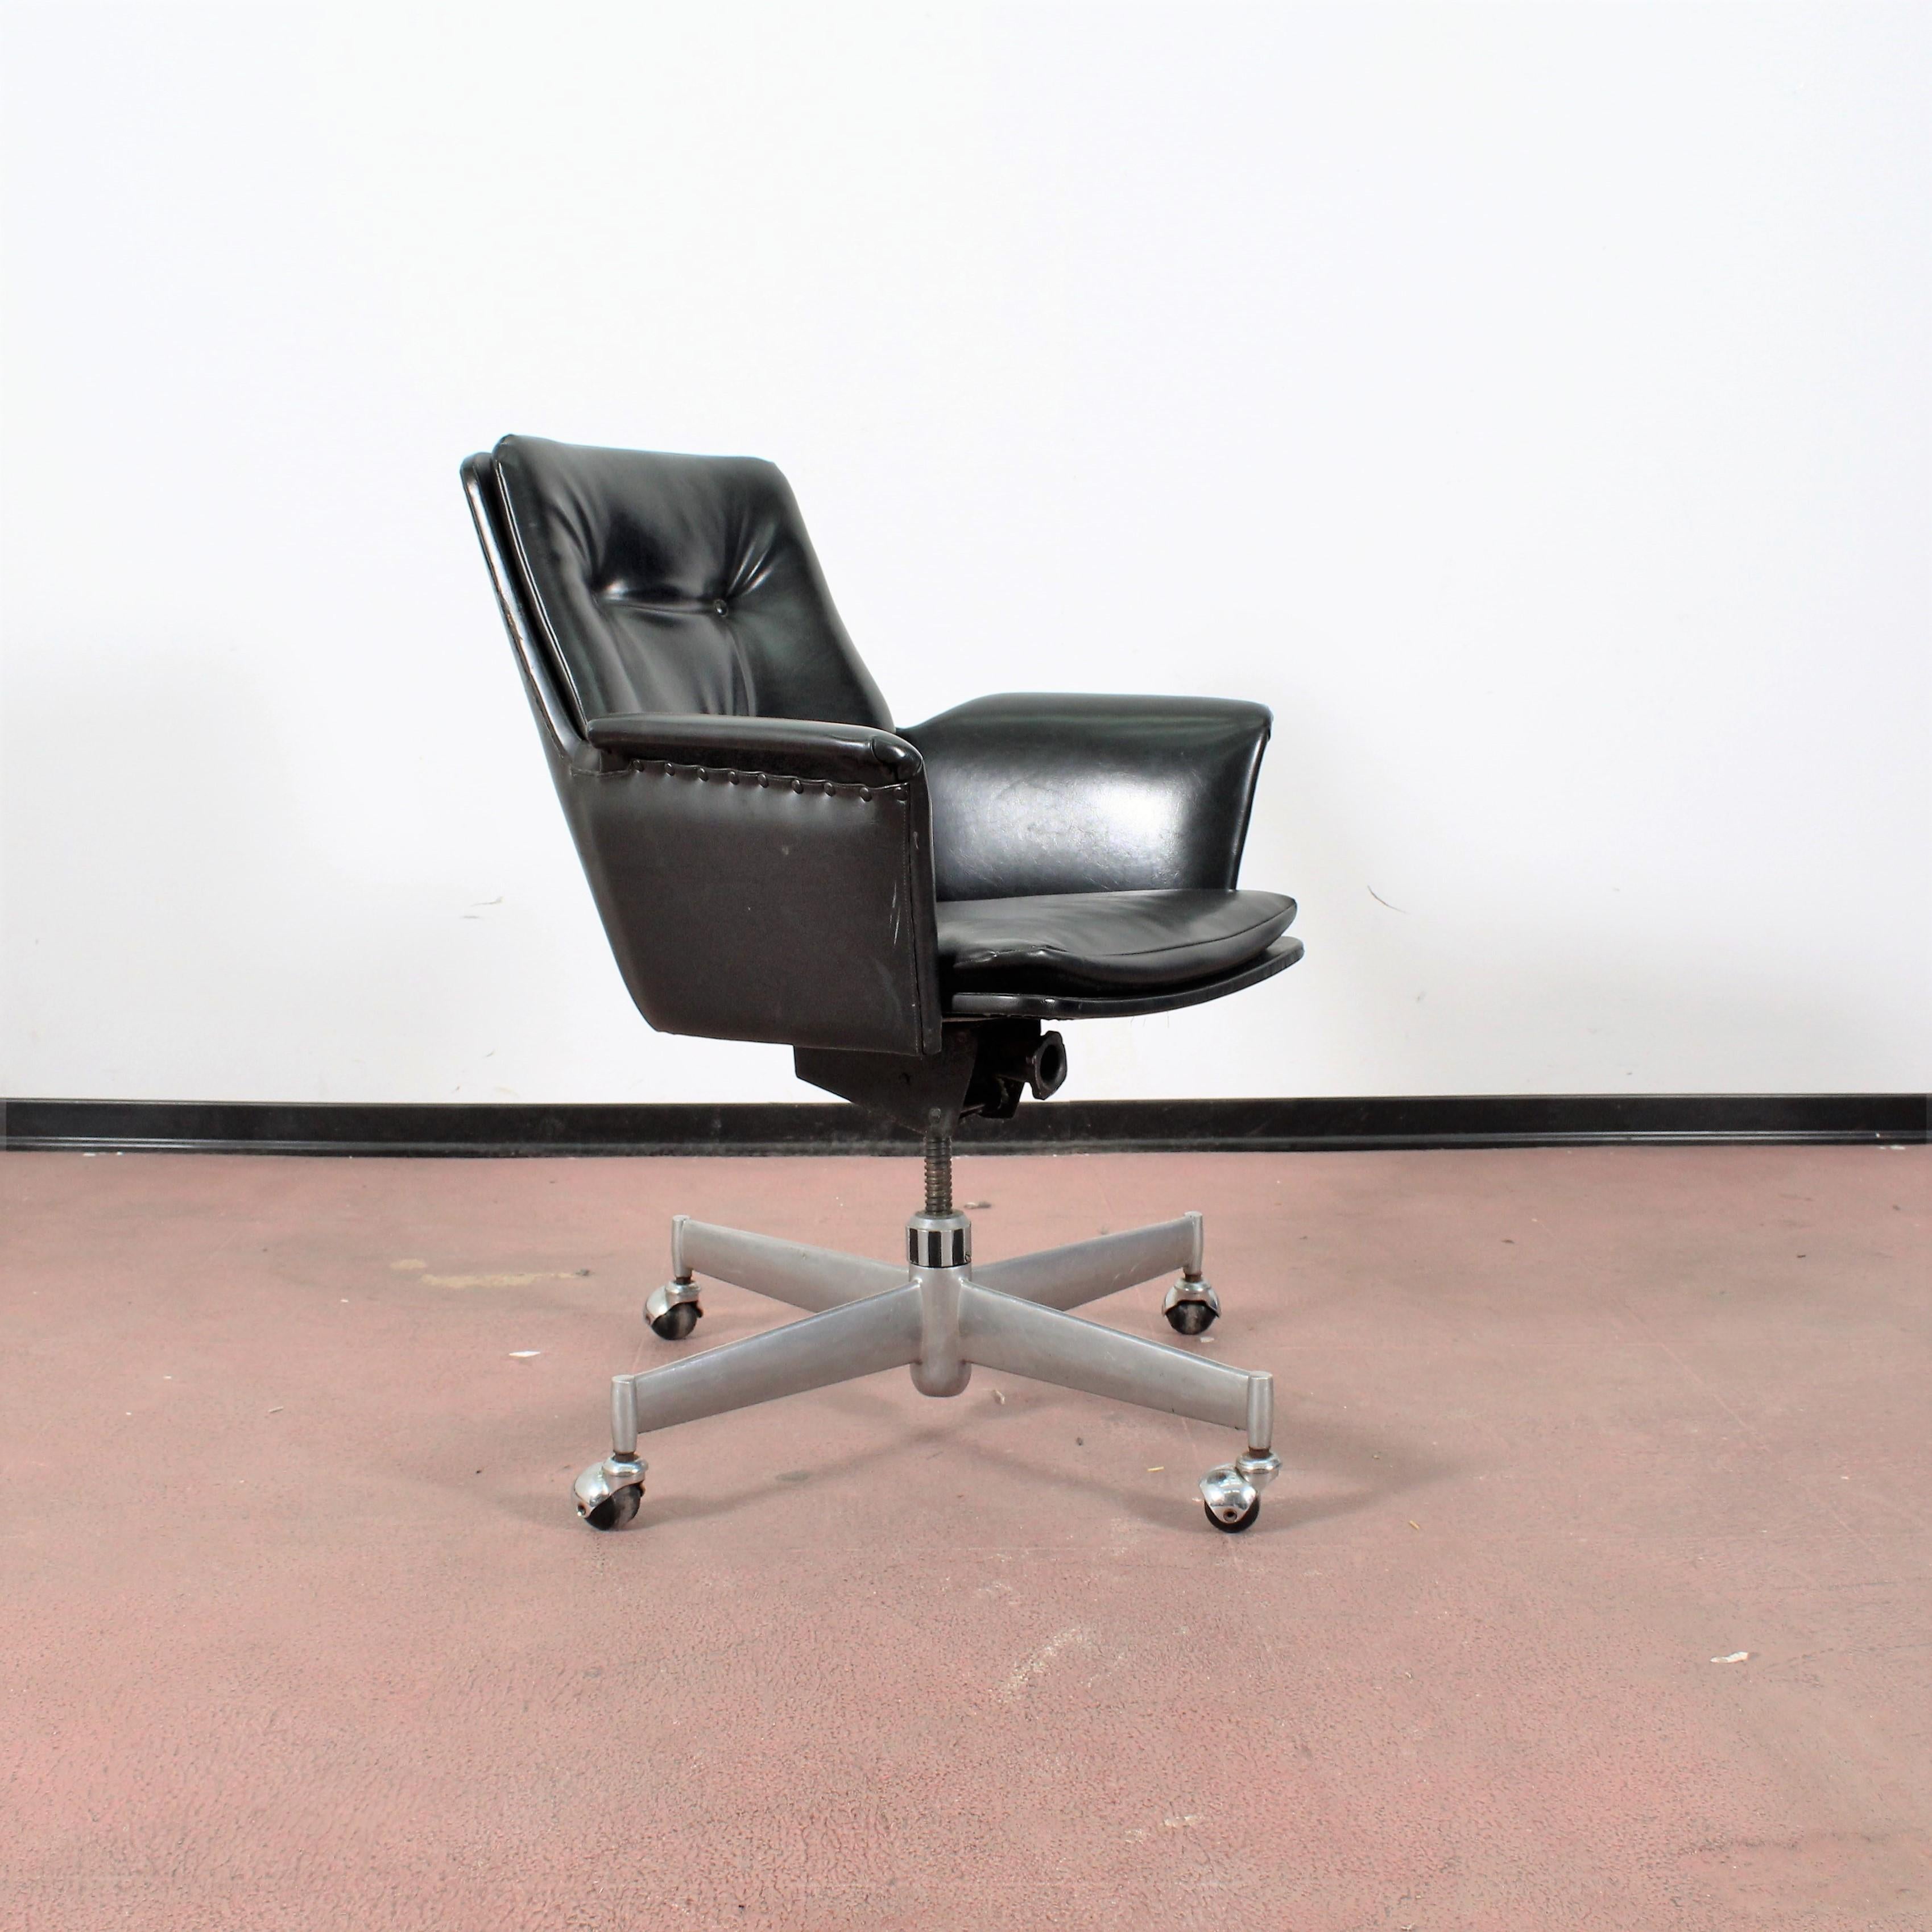 Mid-Century black leather Italian desk chair, 1960s.
Wear consistent with age and use.
 